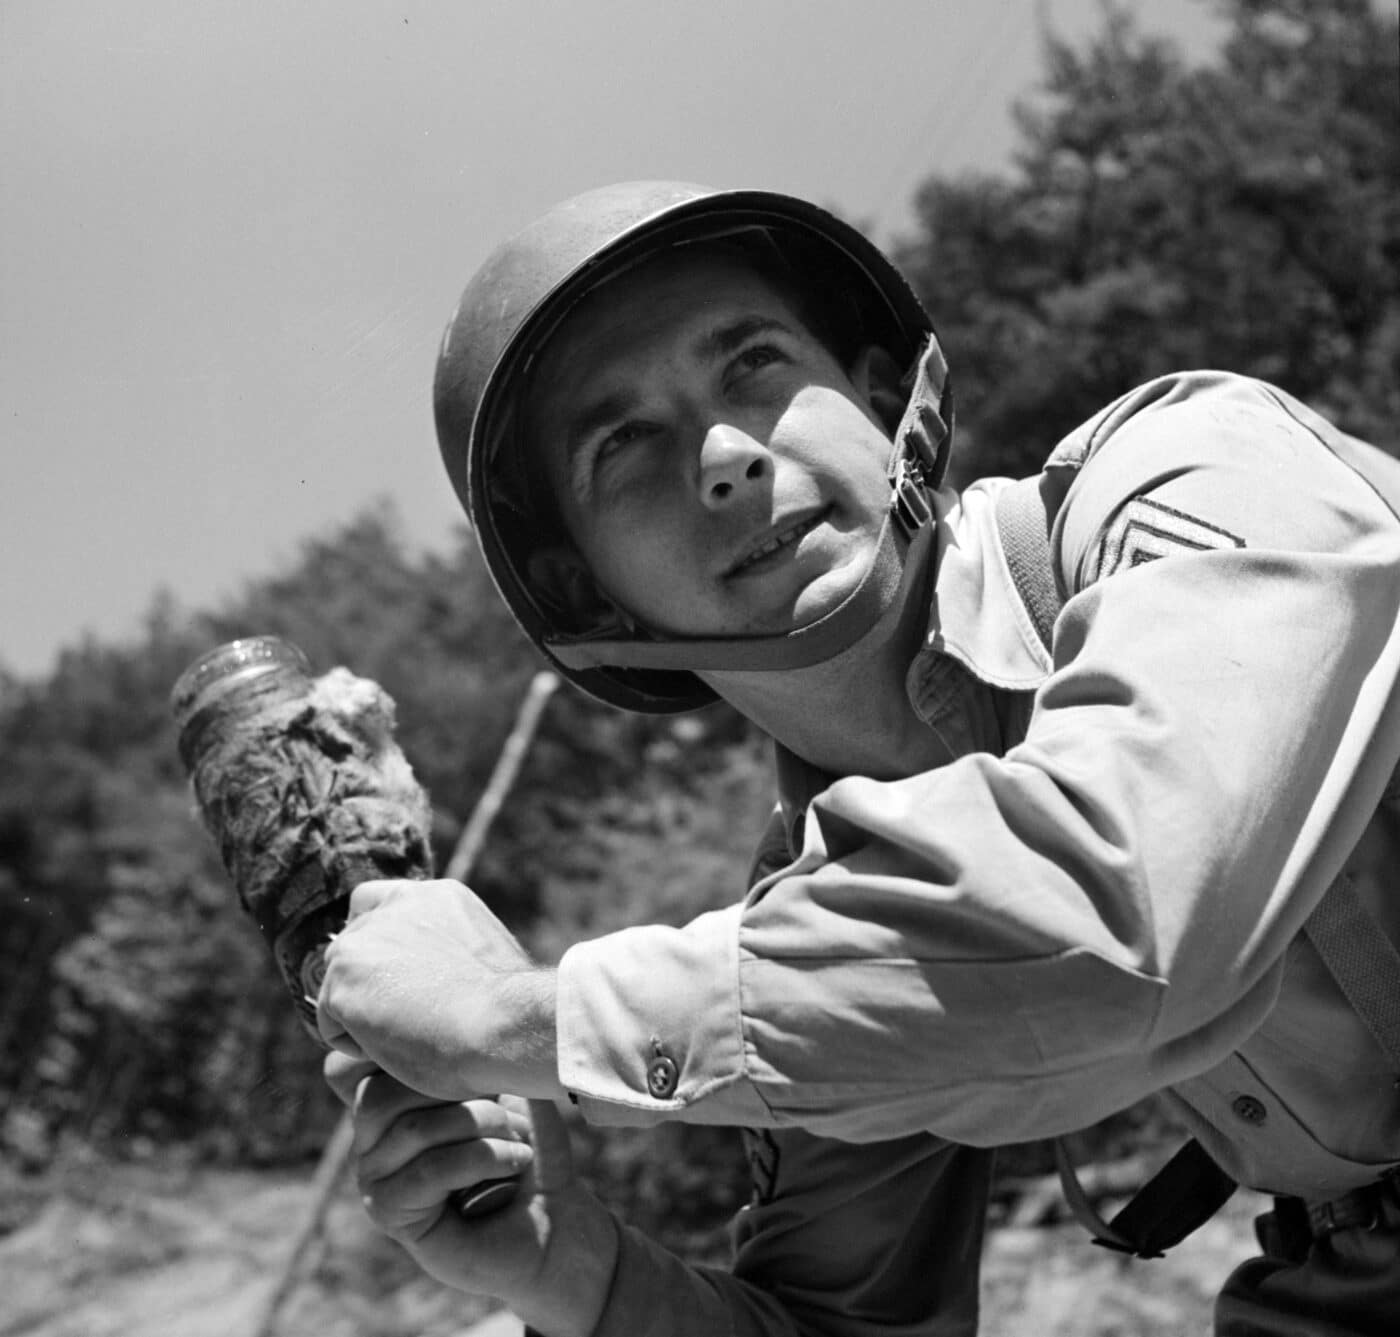 U.S. soldier training with a gas bomb at the Chemical Warfare Center during 1942